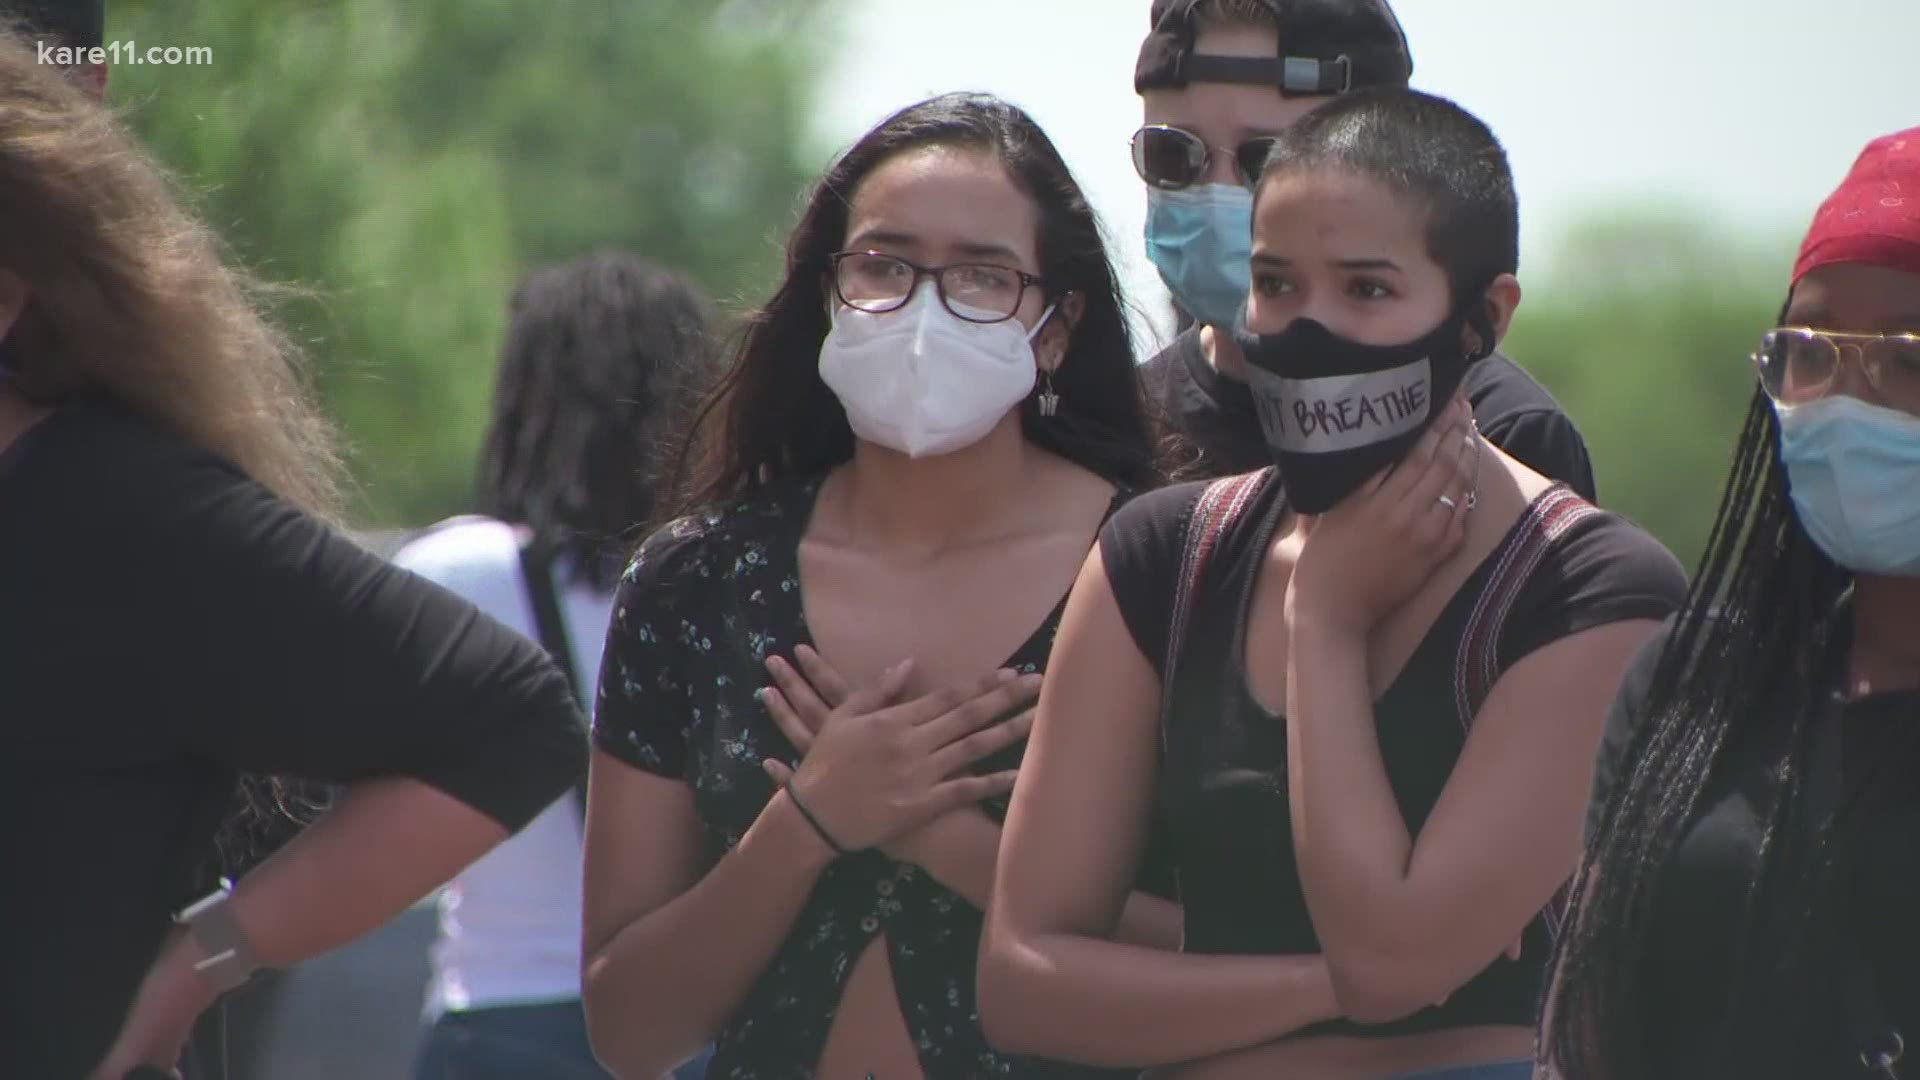 Most of the demonstrators are wearing masks, but health officials say we may still see a spike in new COVID-19 cases.